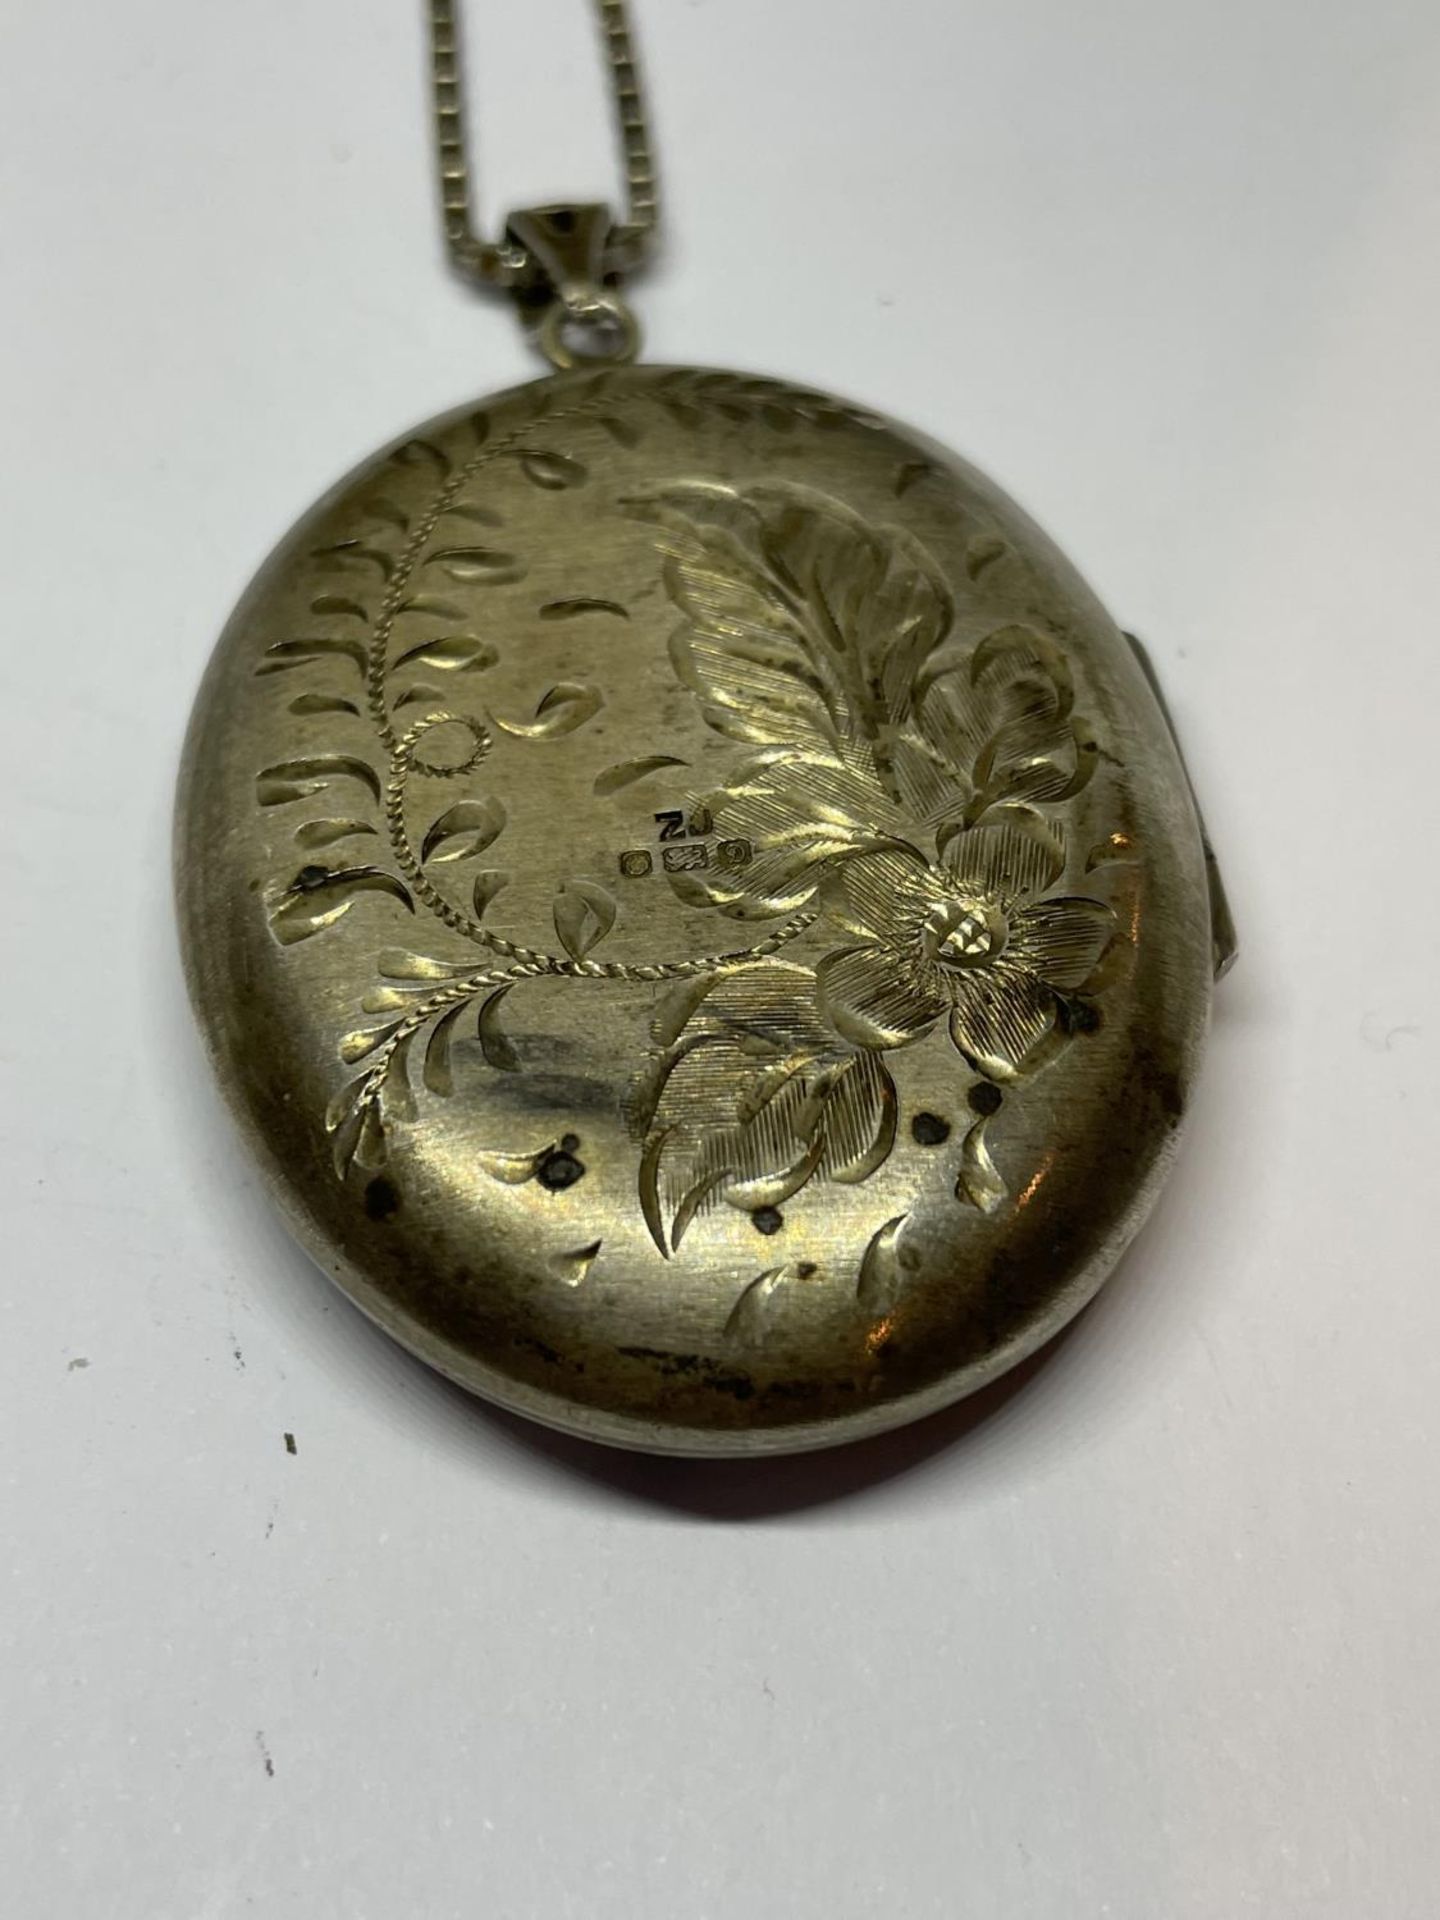 A LARGE ORNATE HALLMARKED SILVER LOCKET WITH CHAIN - Image 2 of 3